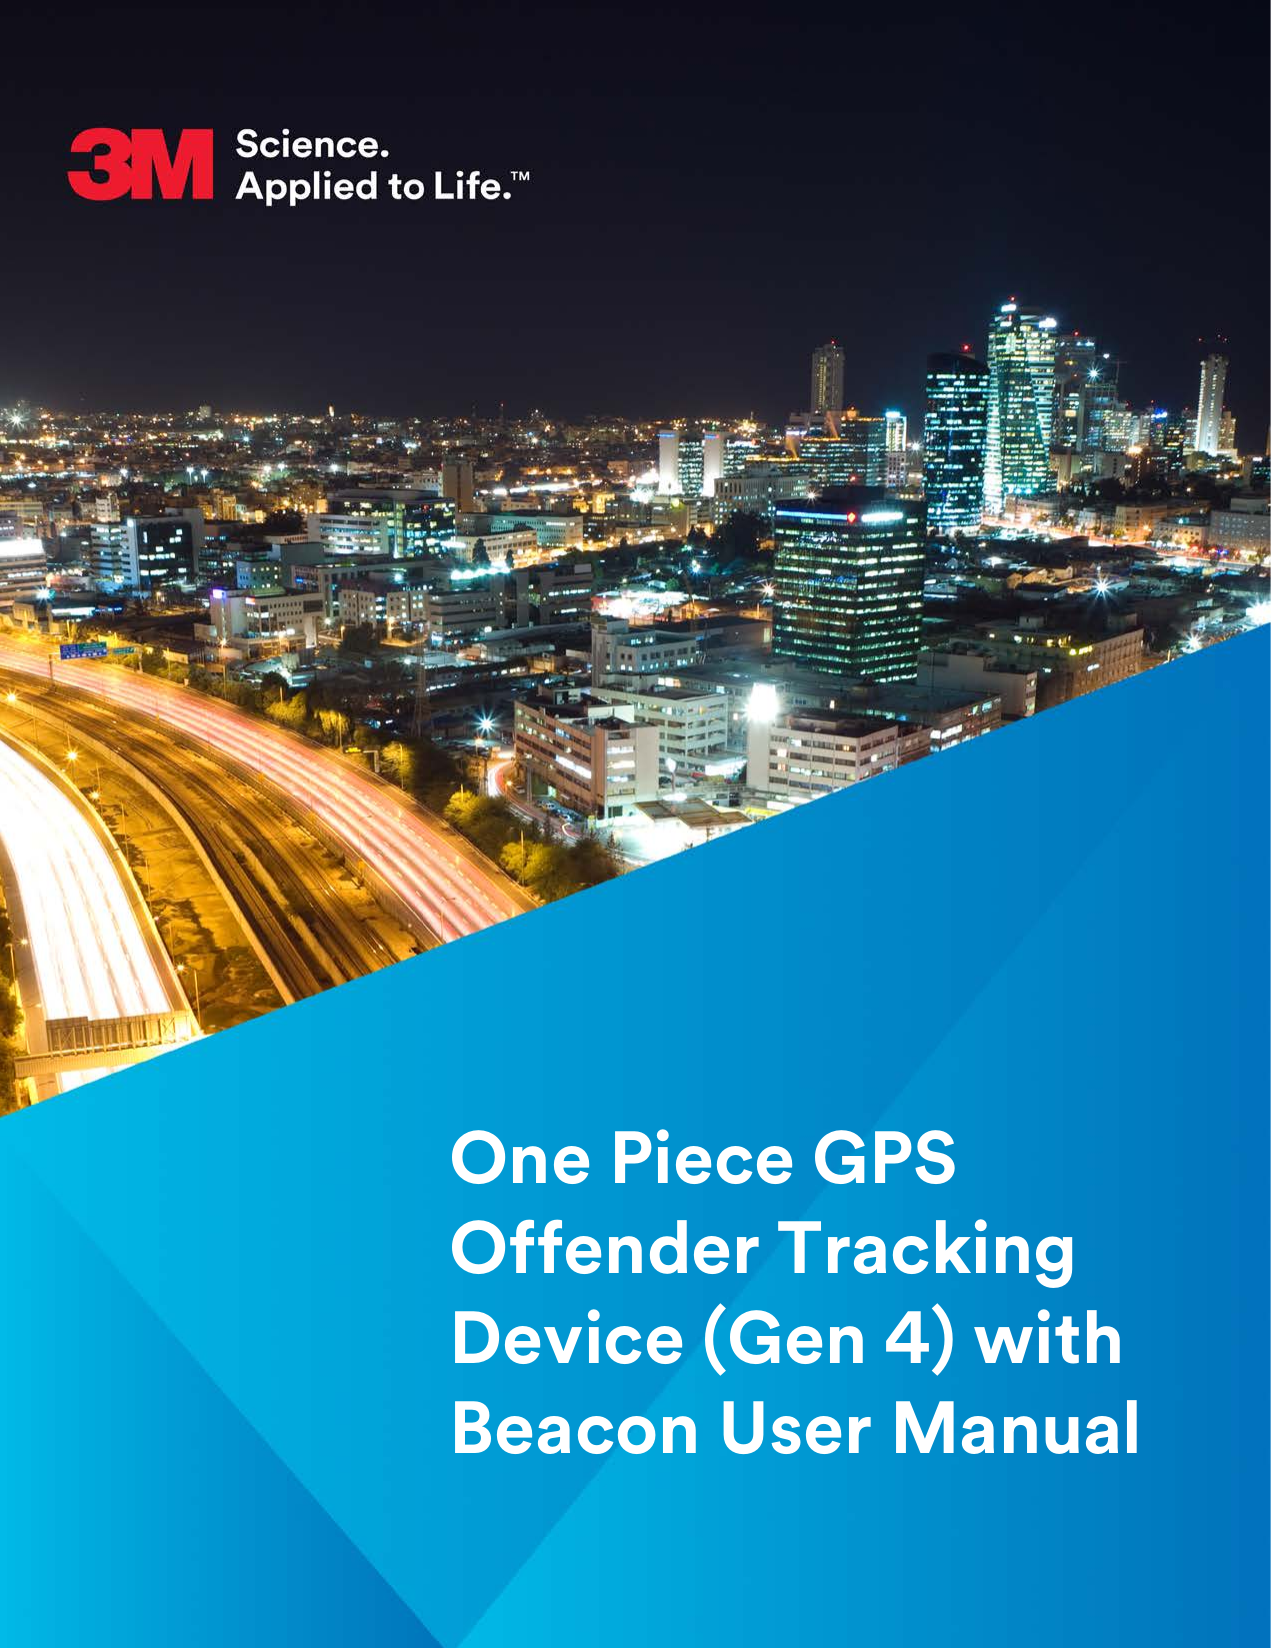    One Piece GPS Offender Tracking Device (Gen 4) with Beacon User Manual 